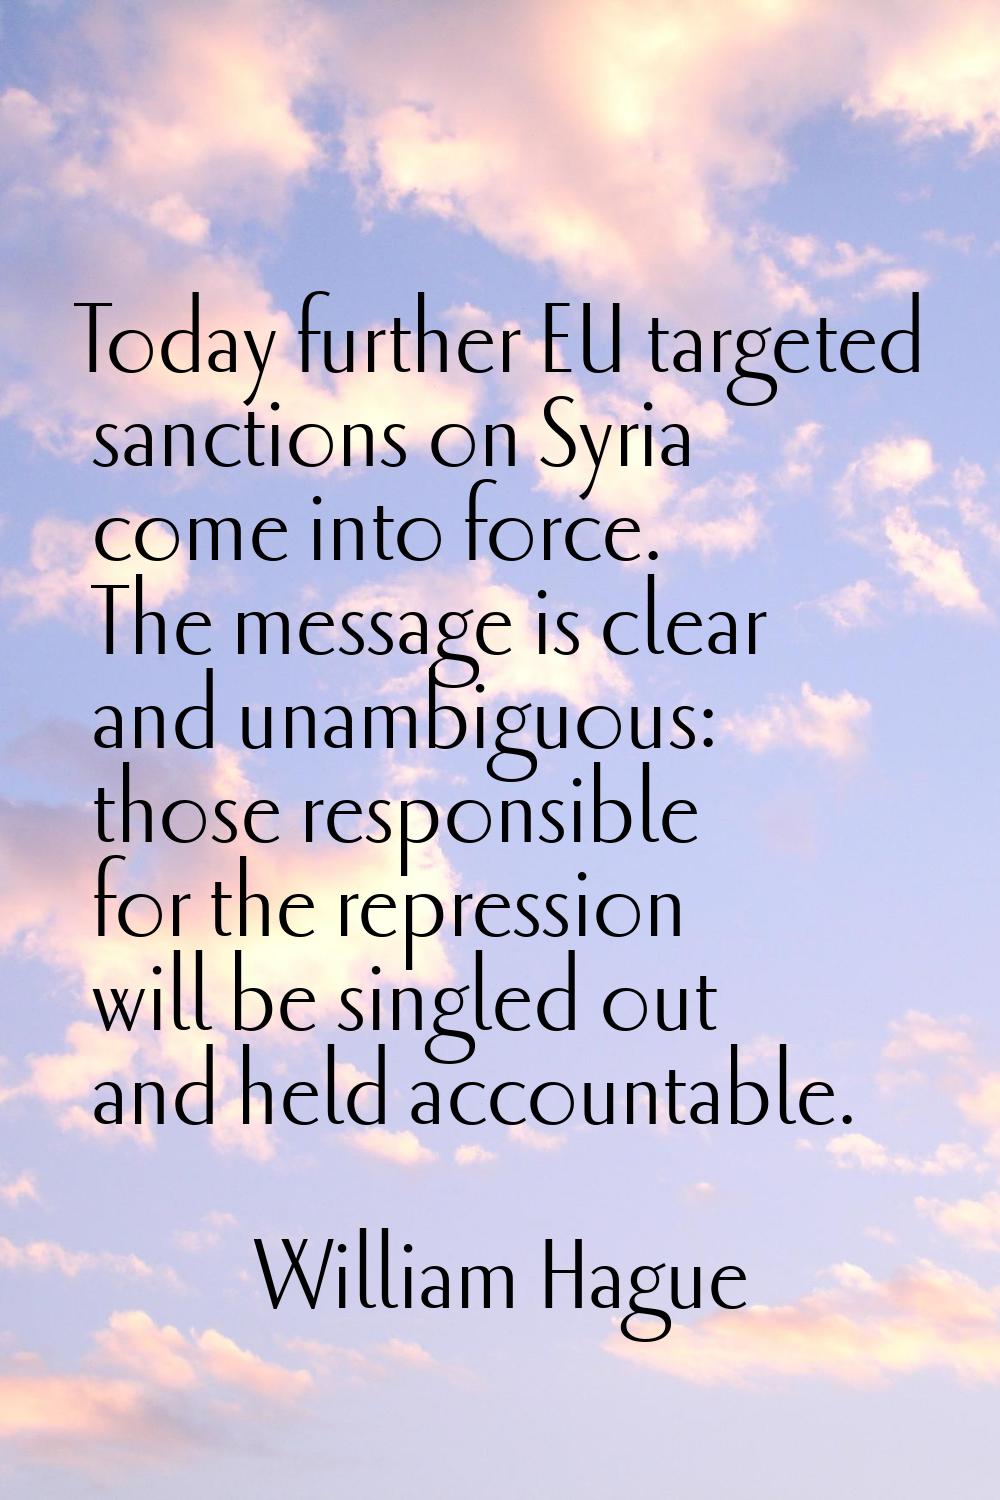 Today further EU targeted sanctions on Syria come into force. The message is clear and unambiguous: